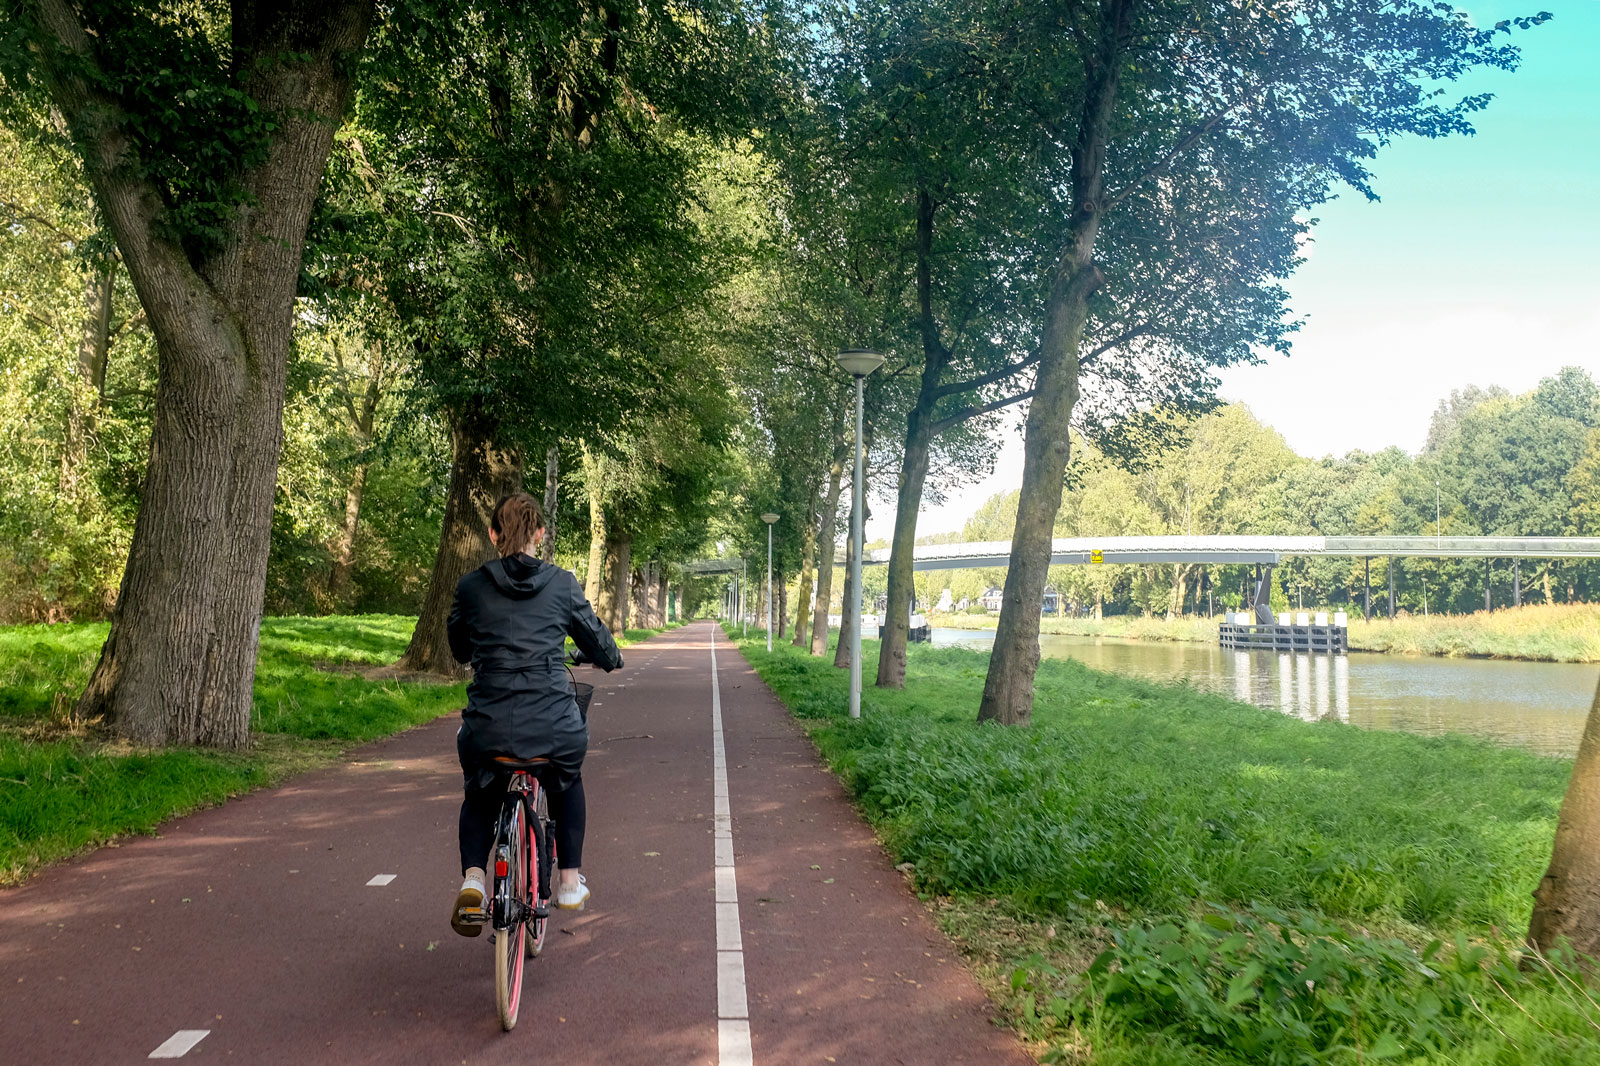 Alyssa bikes along the canals in Amsterdam